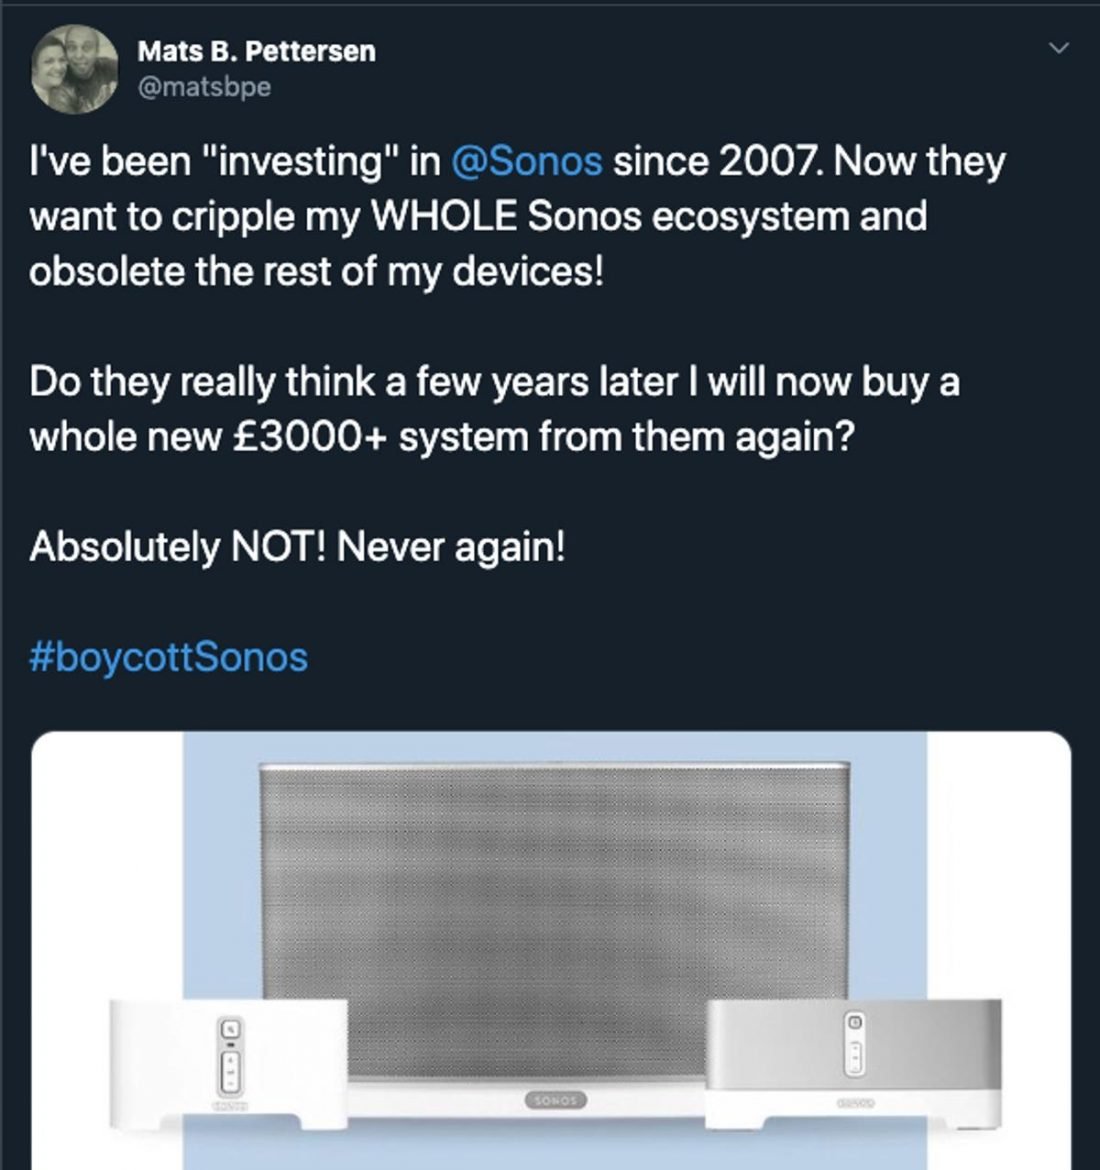 Sonos loses scores of customers, as shown in Tweets with the hashtag boycottSonos.